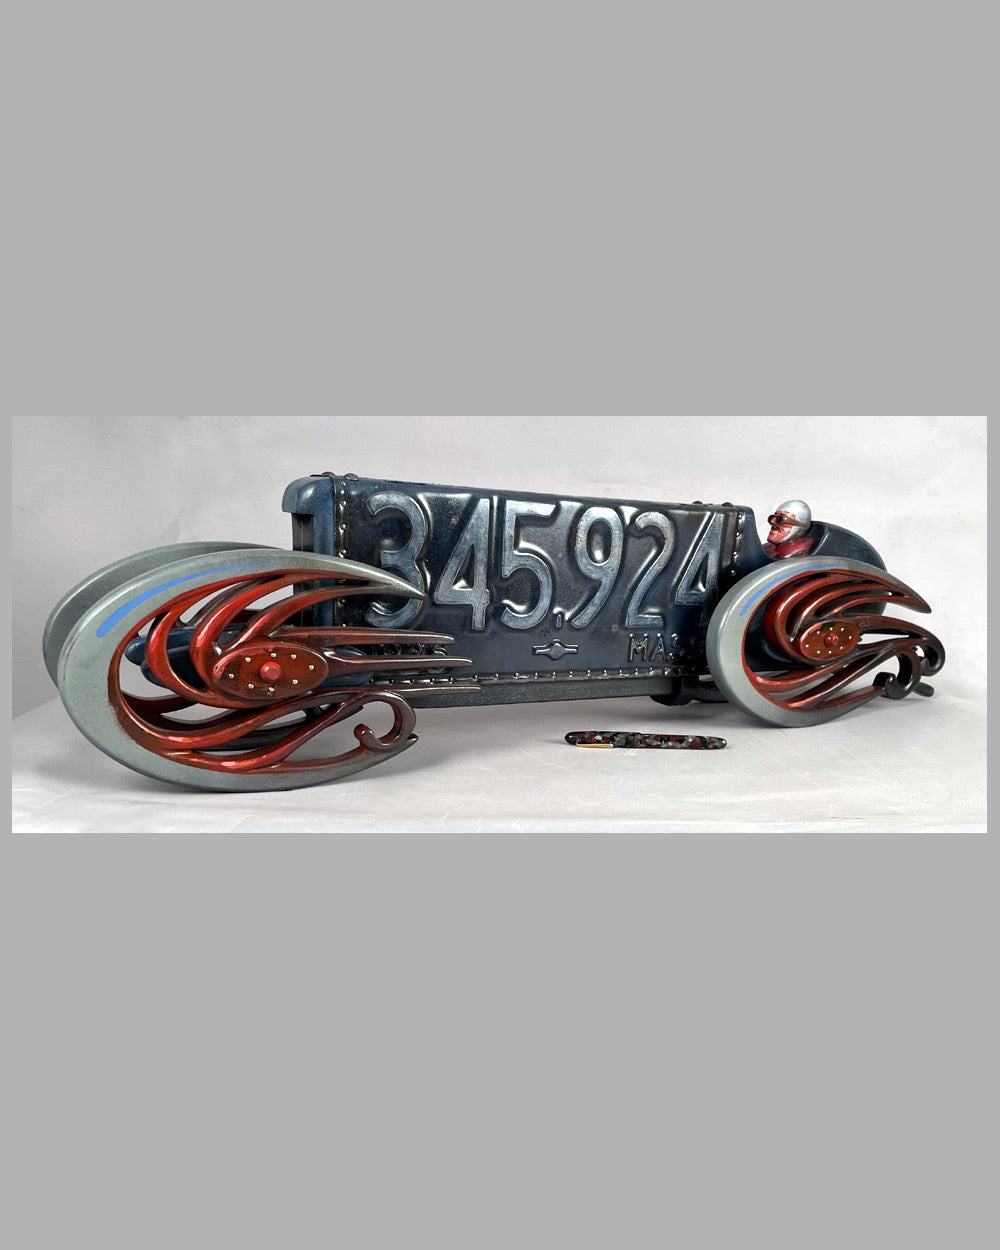 Indy Racer sculpture by Tony Sikorski, 2018